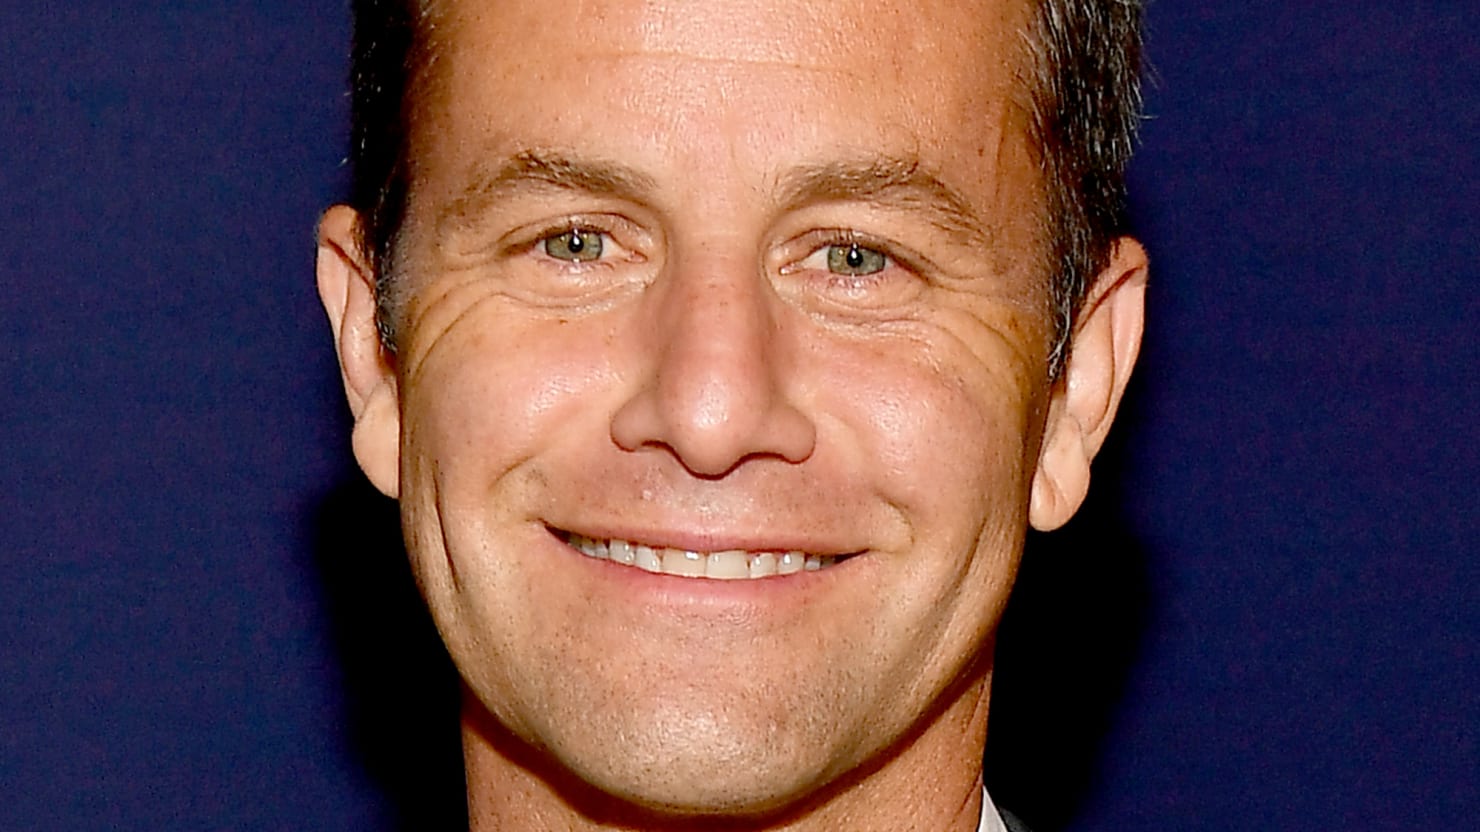 Kirk Cameron Launches Protest for Unmasked Songs Outside California Mall